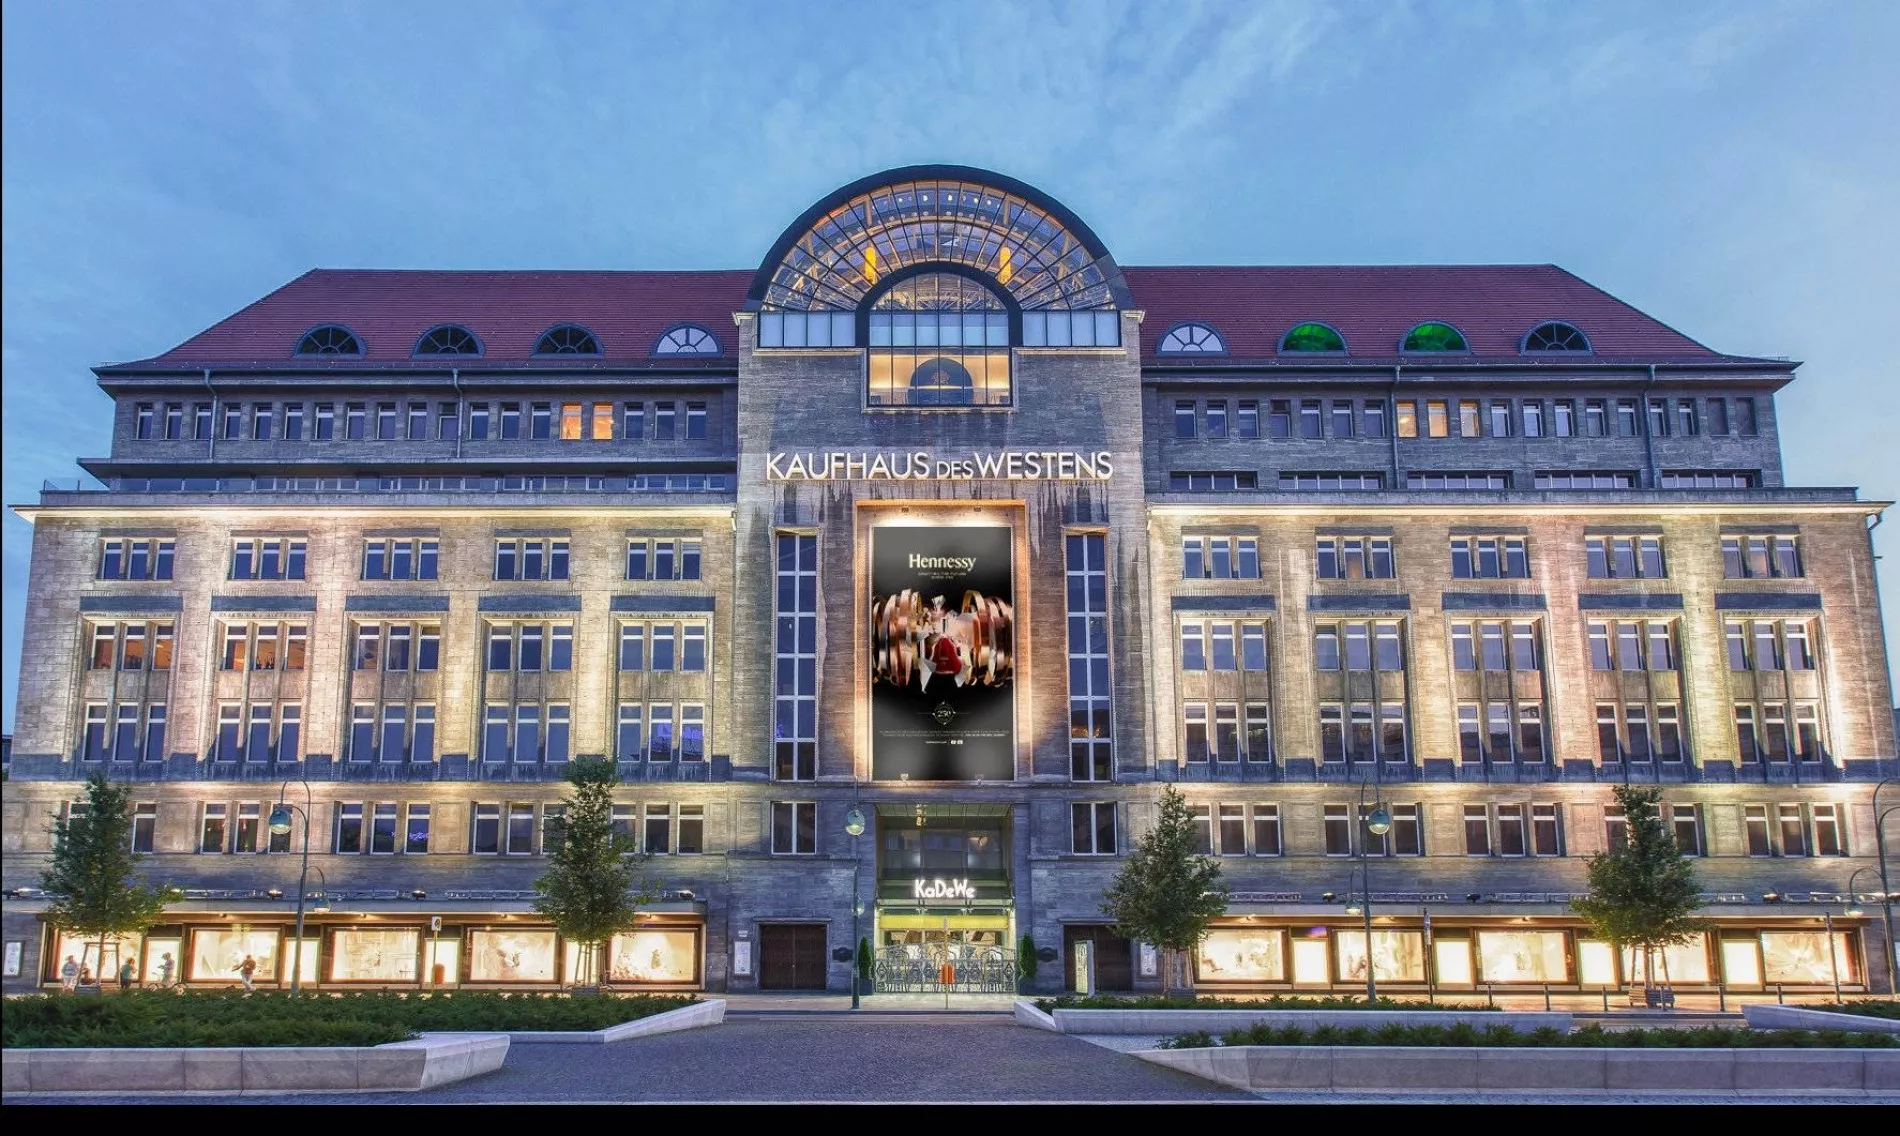 Kaufhaus des Westens in Germany, europe | Handbags,Shoes,Accessories,Clothes,Natural Beauty Products,Cosmetics,Sportswear,Watches,Travel Bags - Country Helper